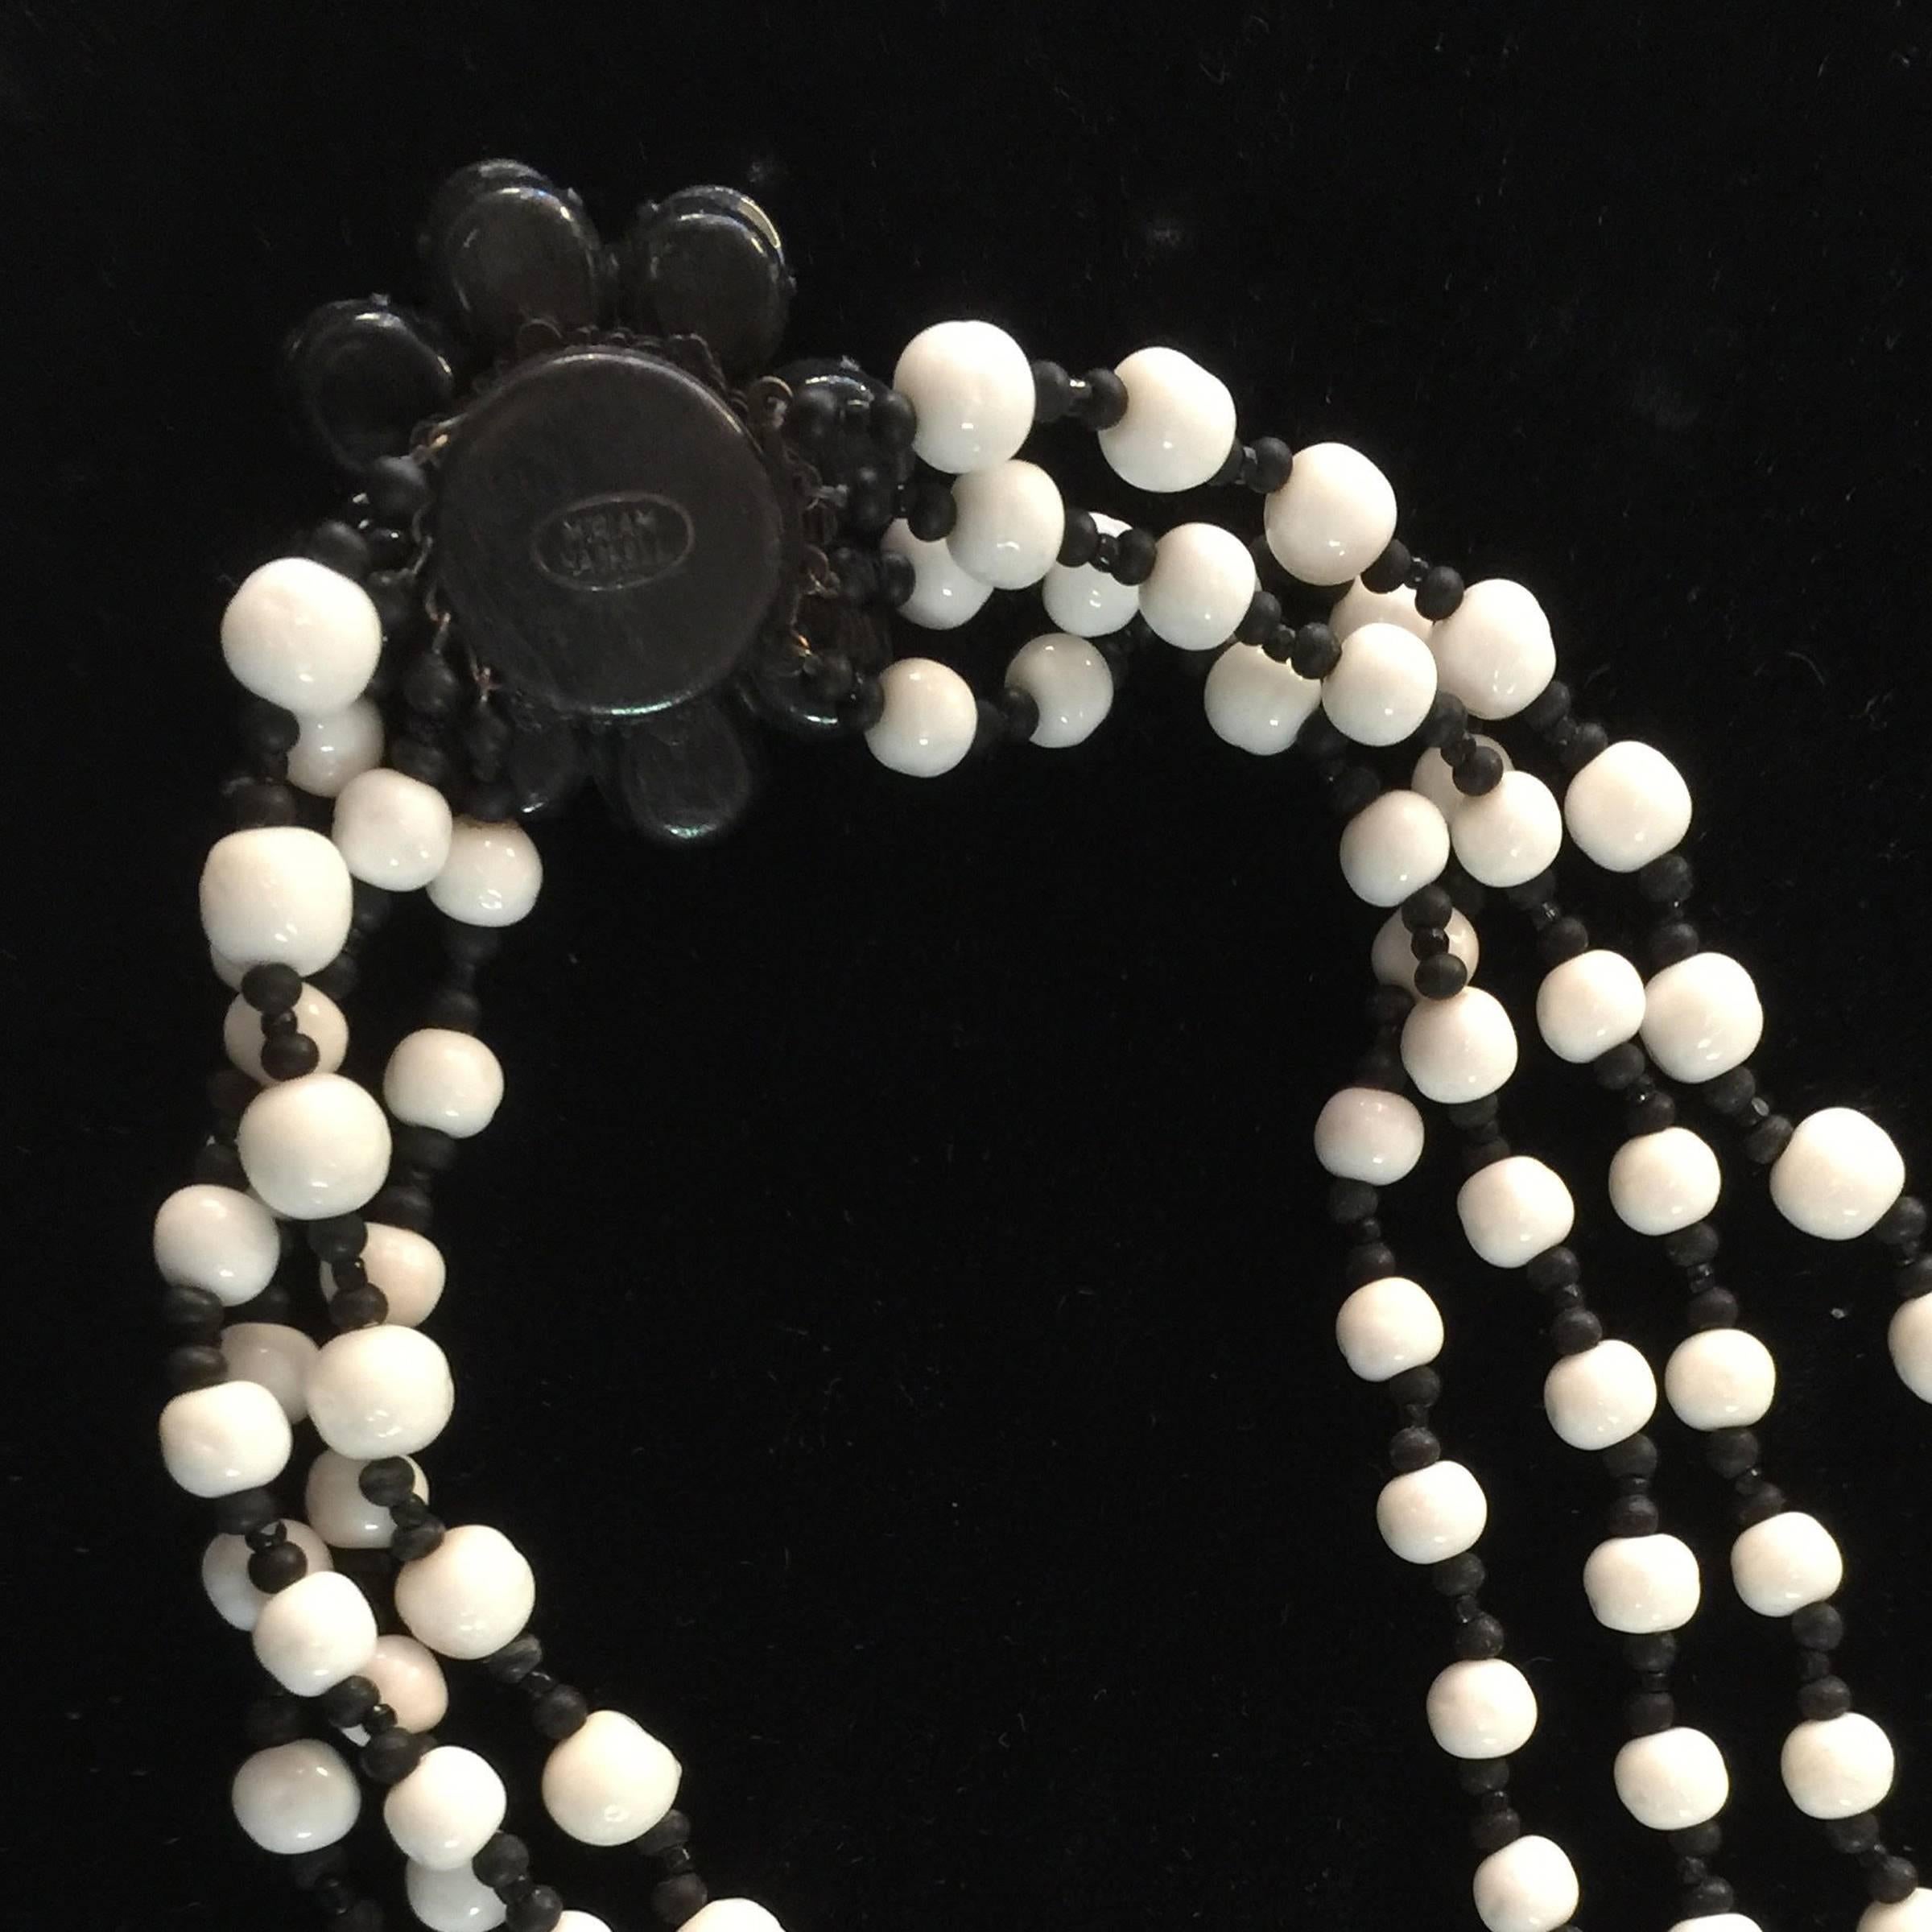 This wonderful 4 strand milk glass necklace by Miriam Haskell is chic and sophisiticated while also having the air of freshness and summer lightness Haskell florals are famous for, Black spacer beads add contrast in between the milk white glass